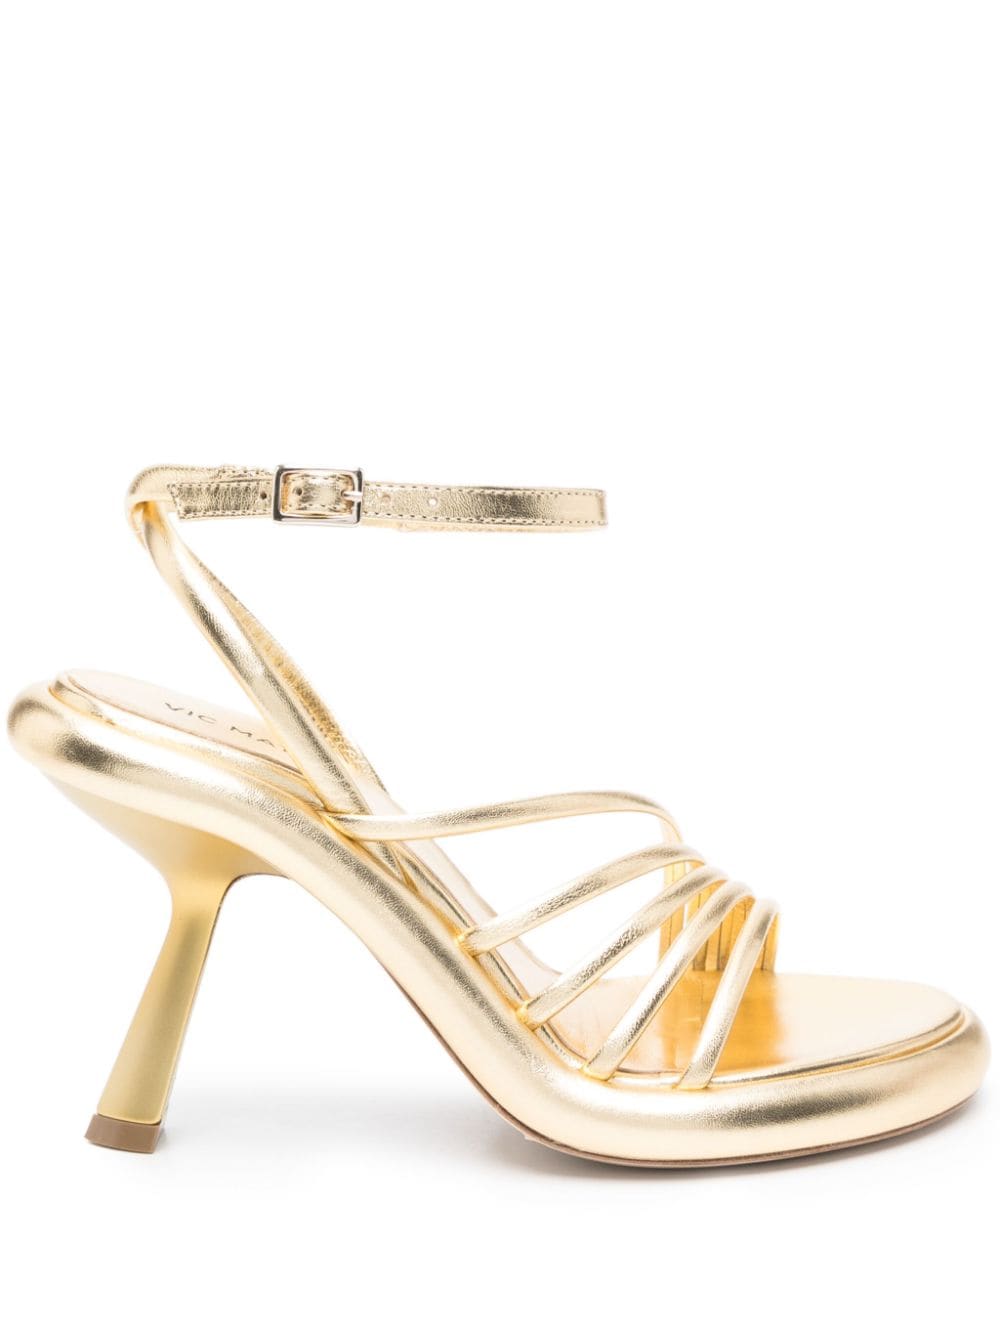 Vic Matie Dosh 80mm Leather Sandals In Gold